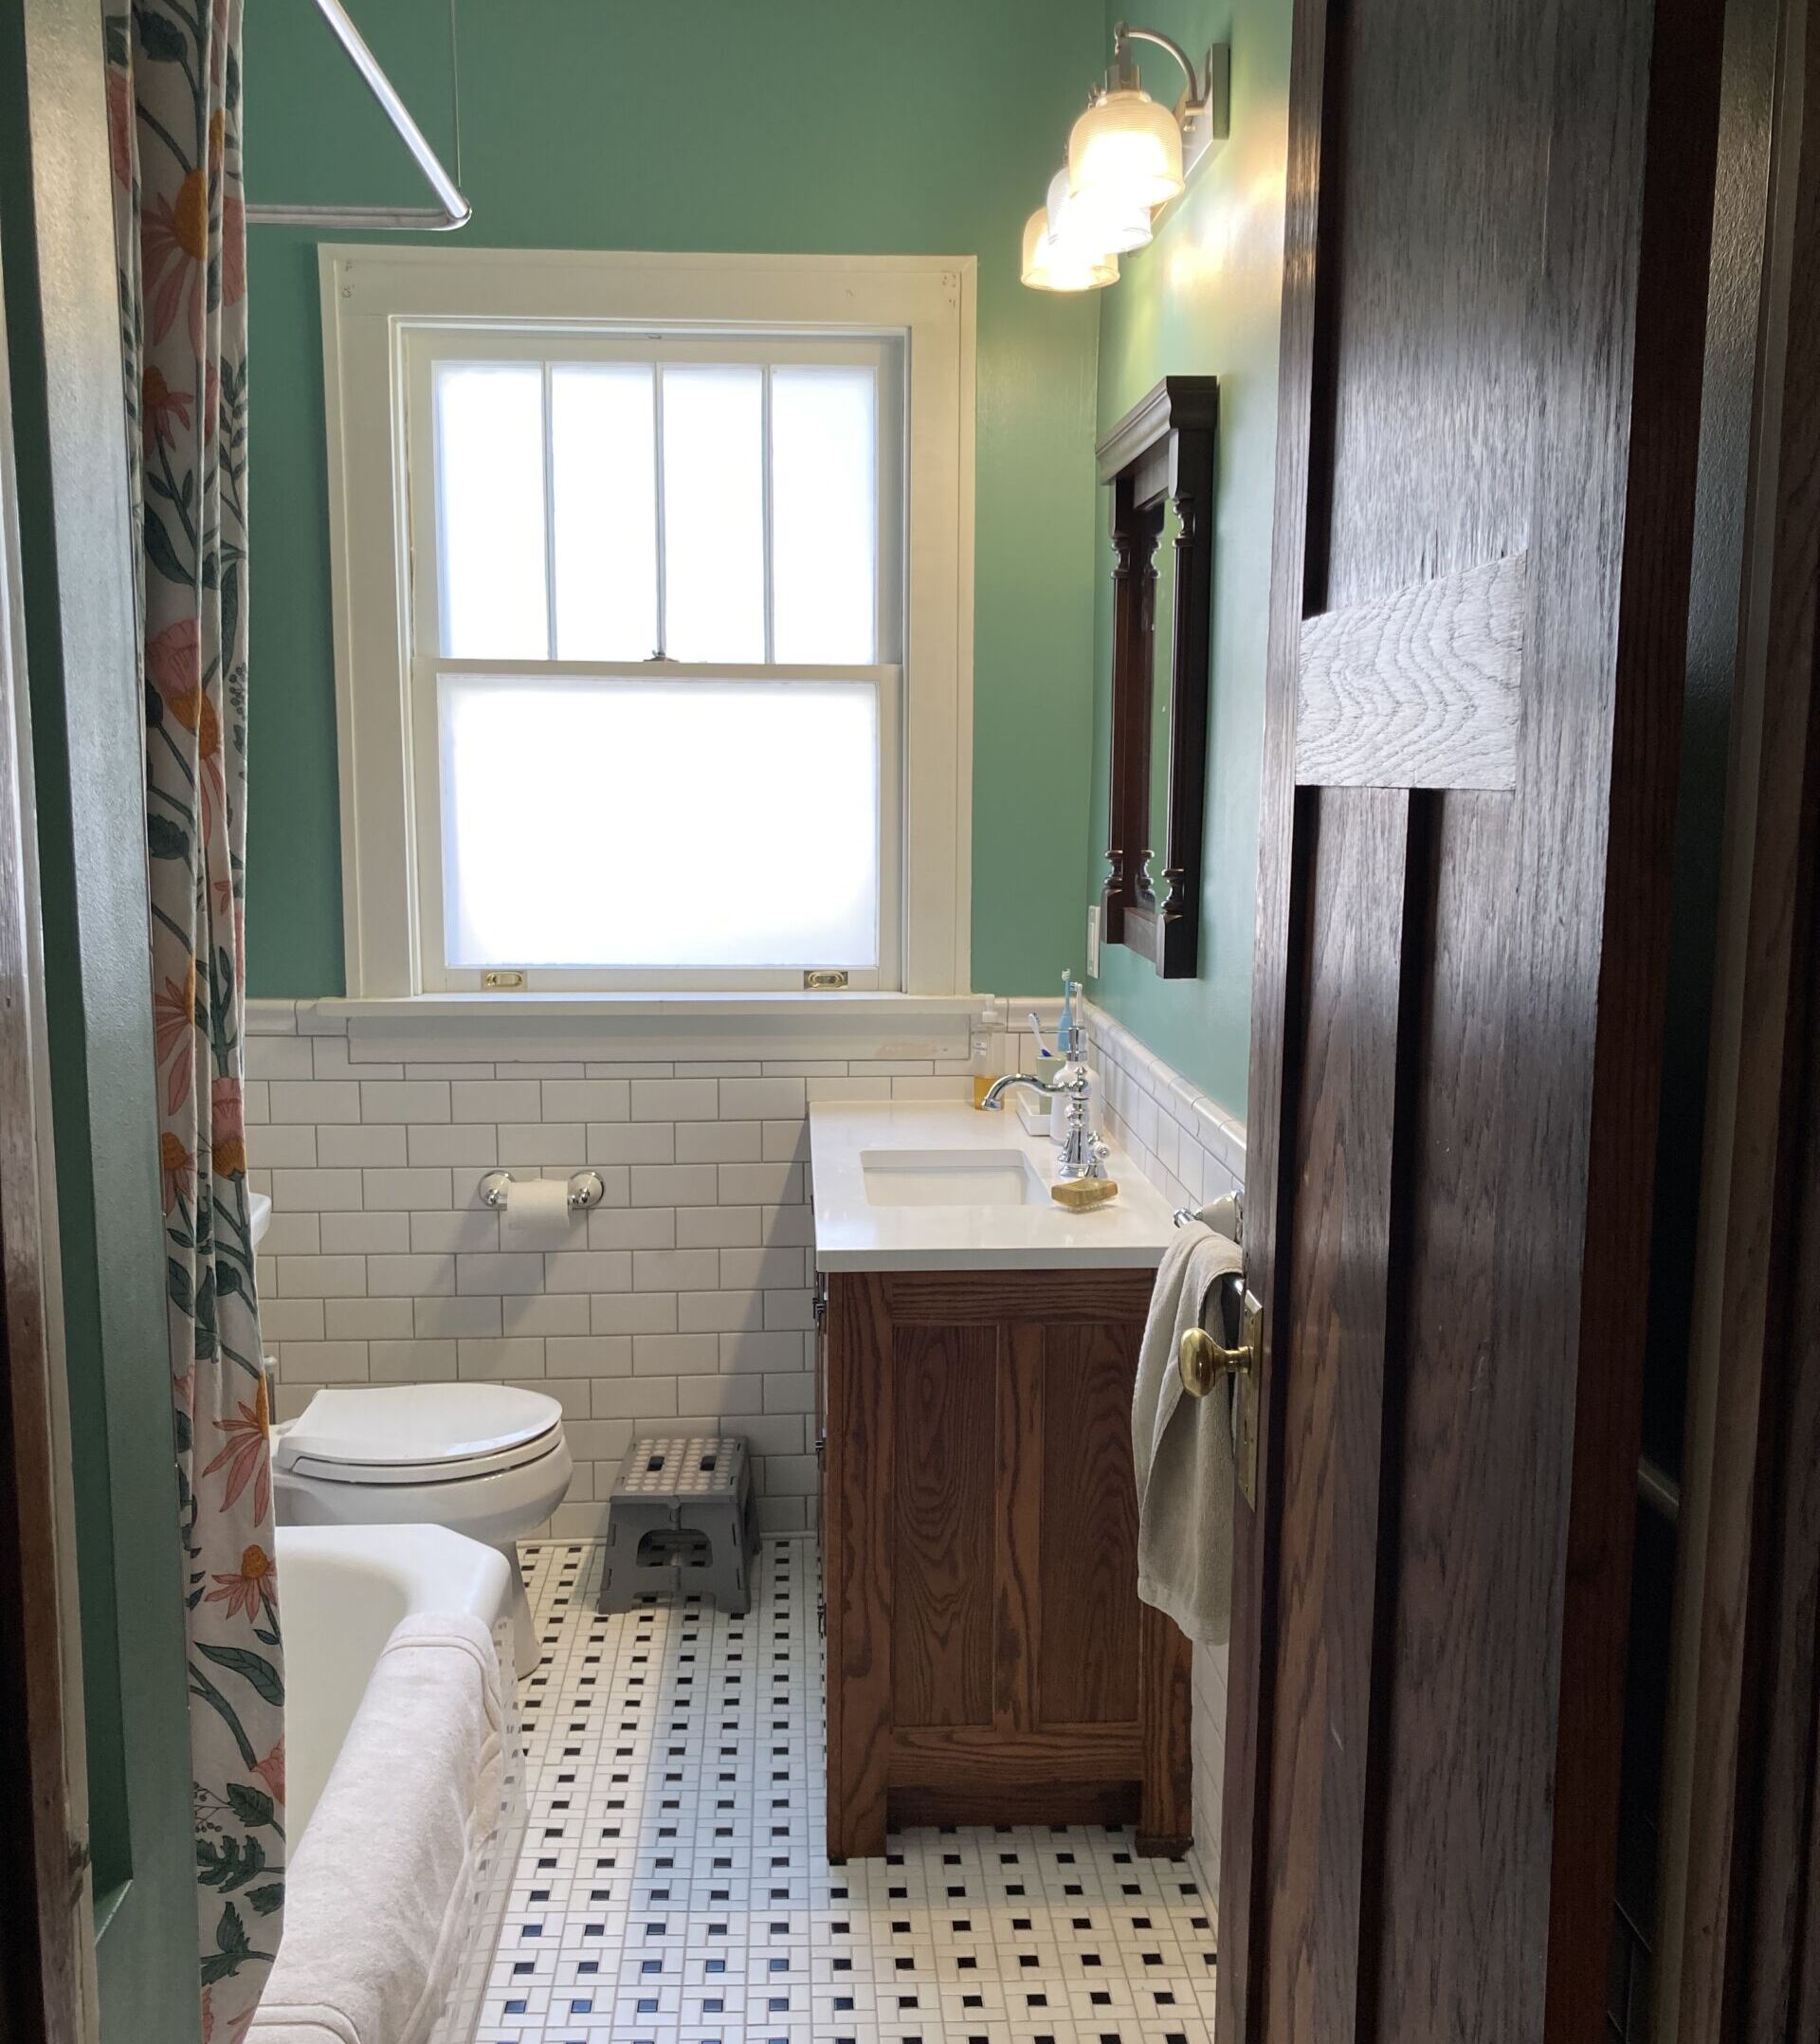 Updated bathroom with new white tile and fresh green paint